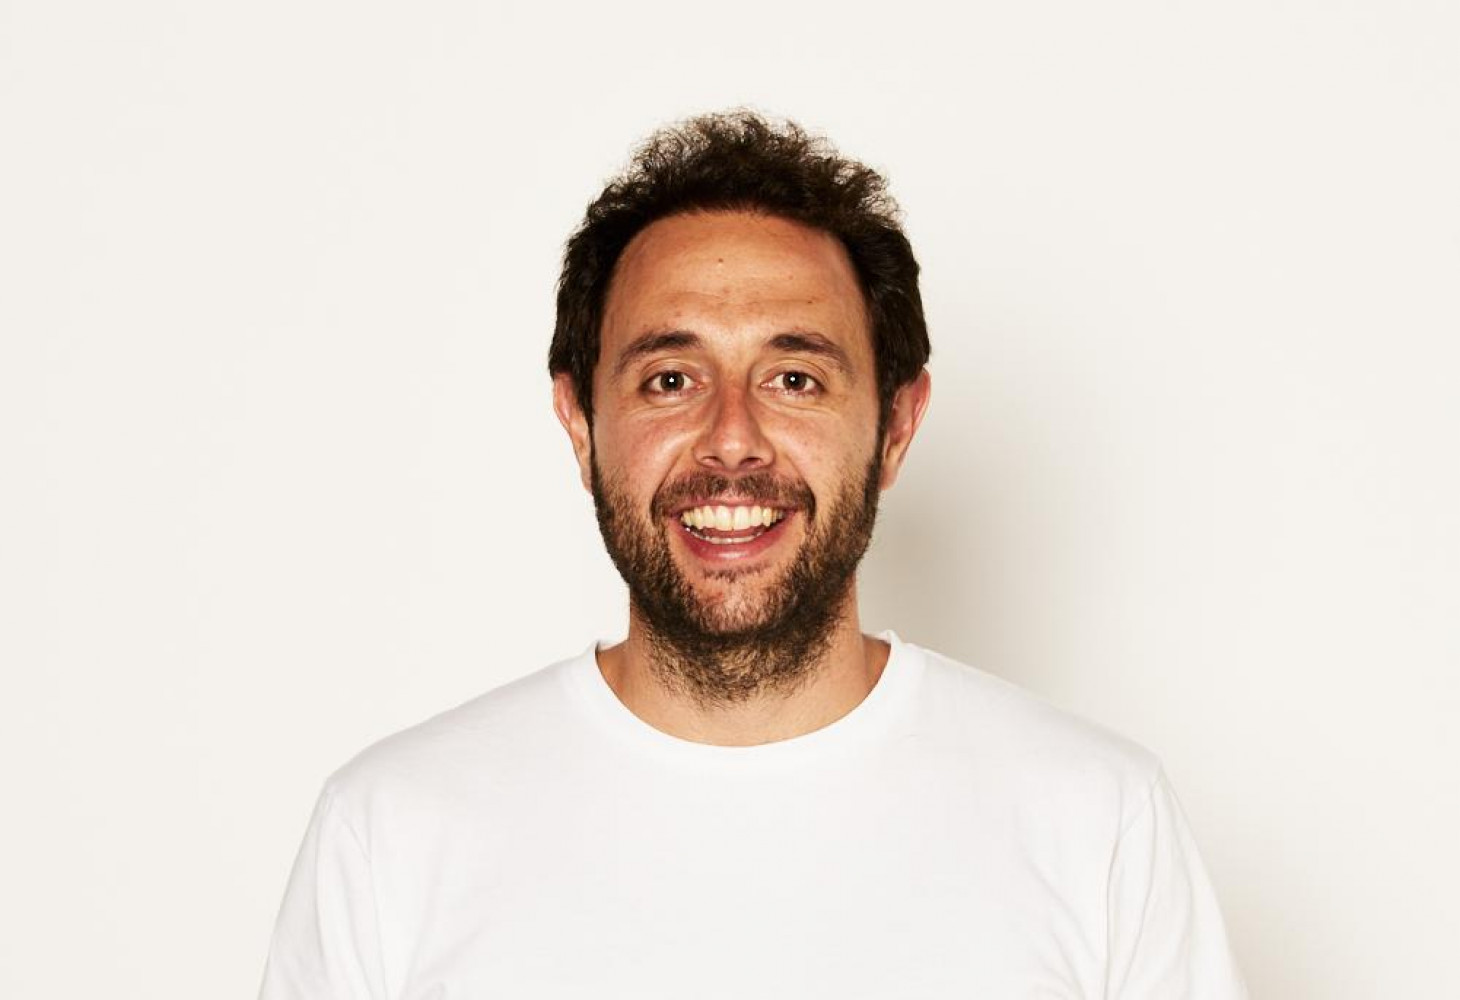 Pepe Martin, CEO of Minimalism brand and benchmark in conscious entrepreneurship, sustainability and transparency